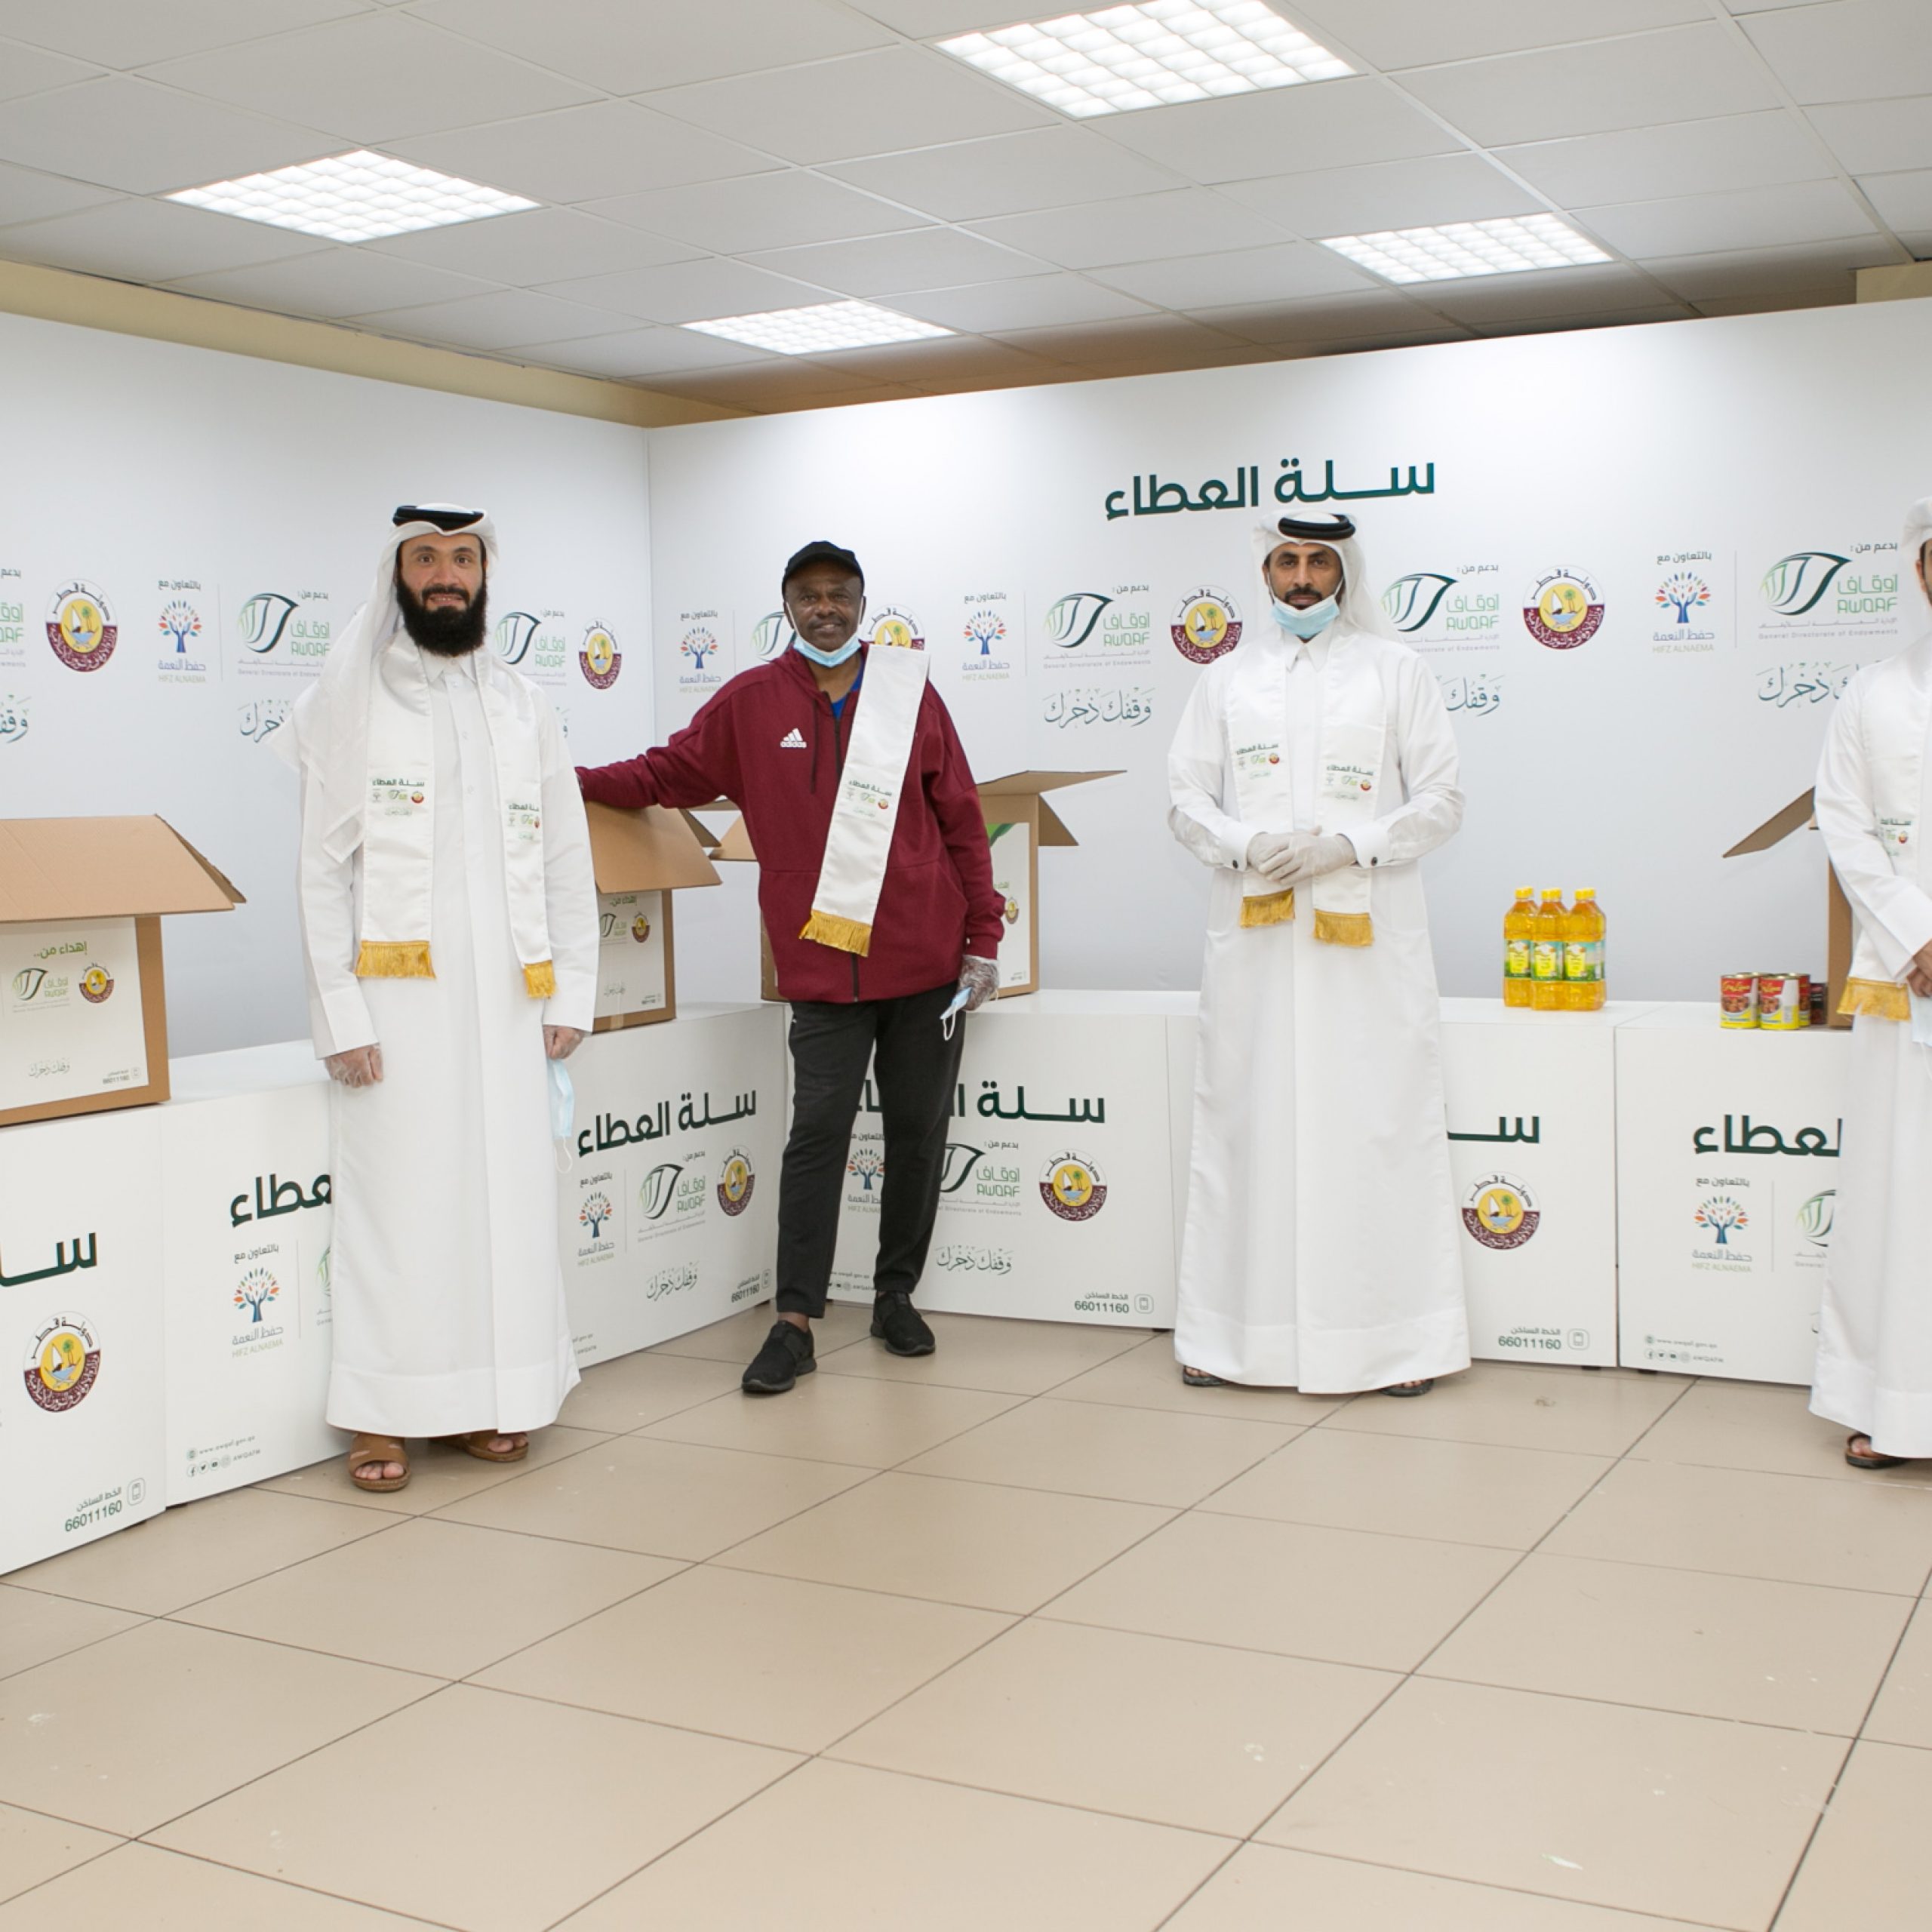 Awqaf Ministry to provide food baskets to over 1,000 needy families for 3 months